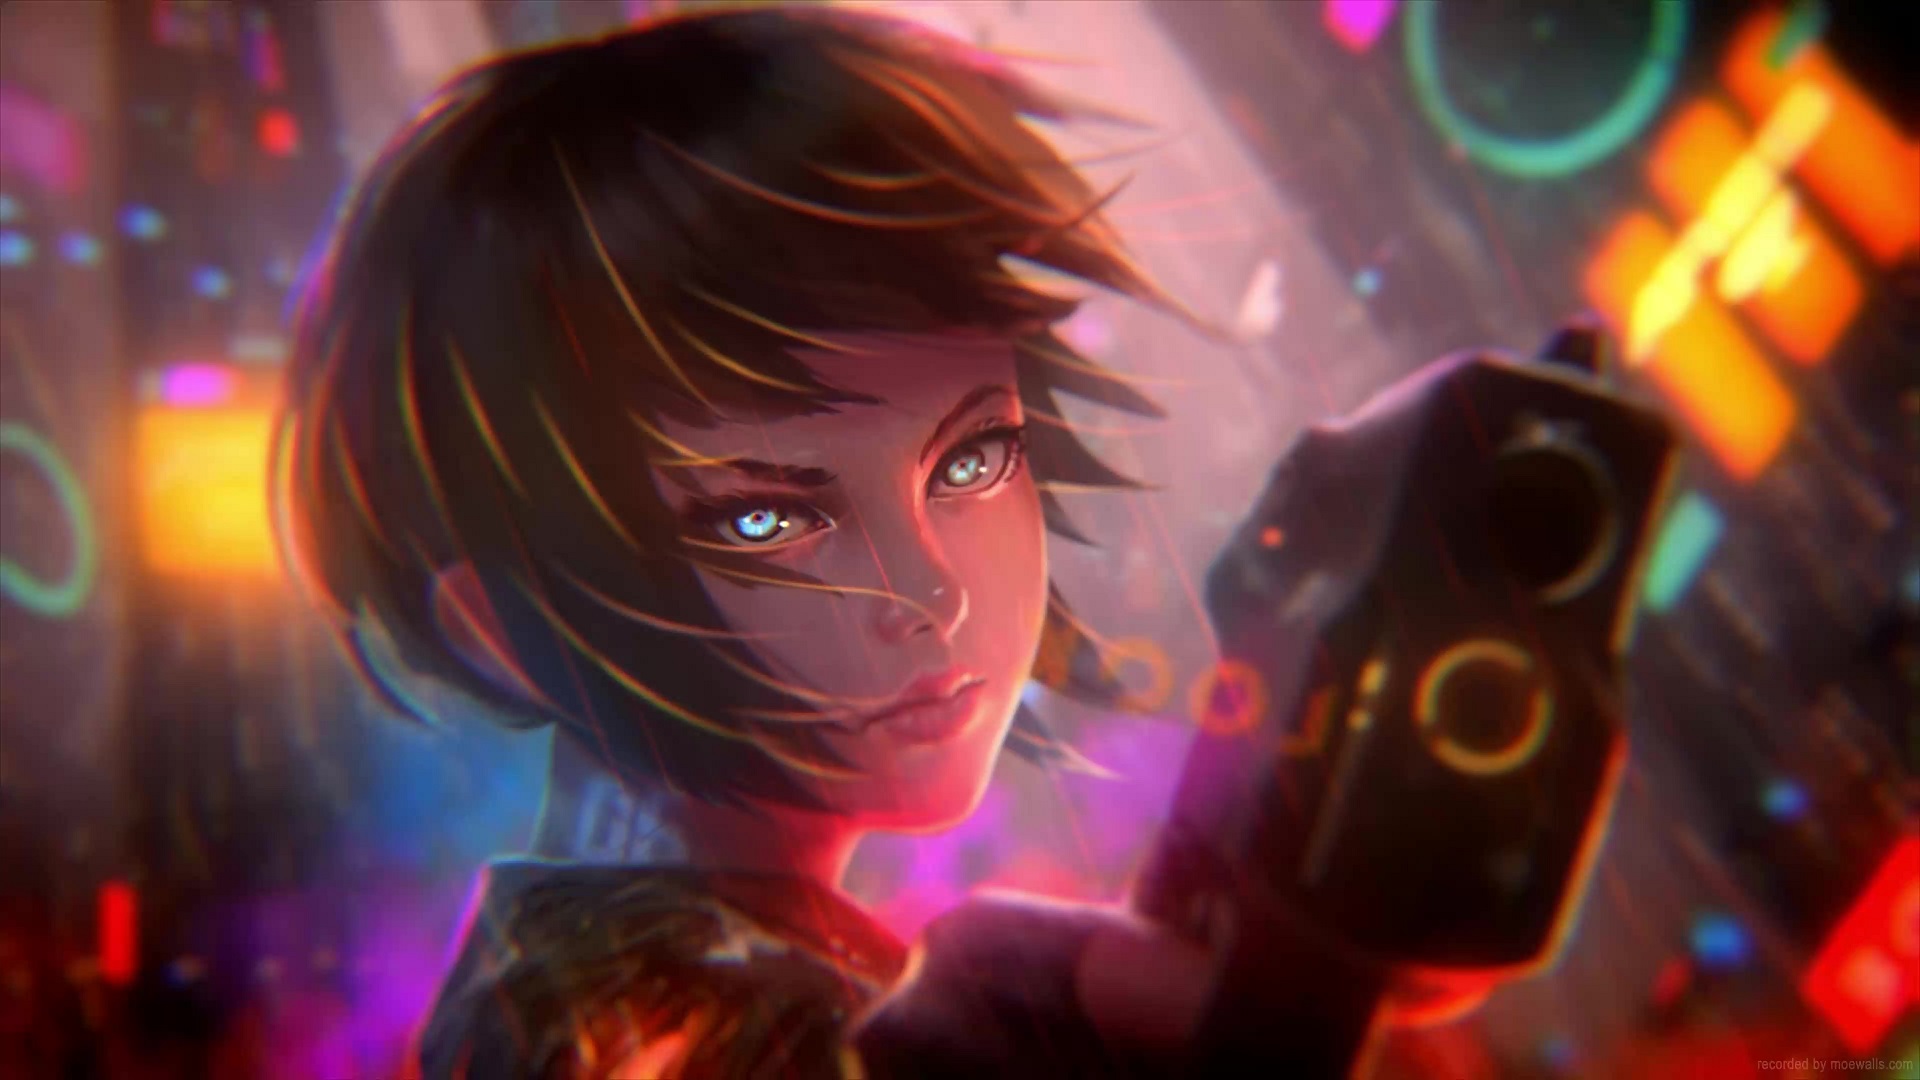 Here is the updated wallpaper of an anime girl in a cyberpunk